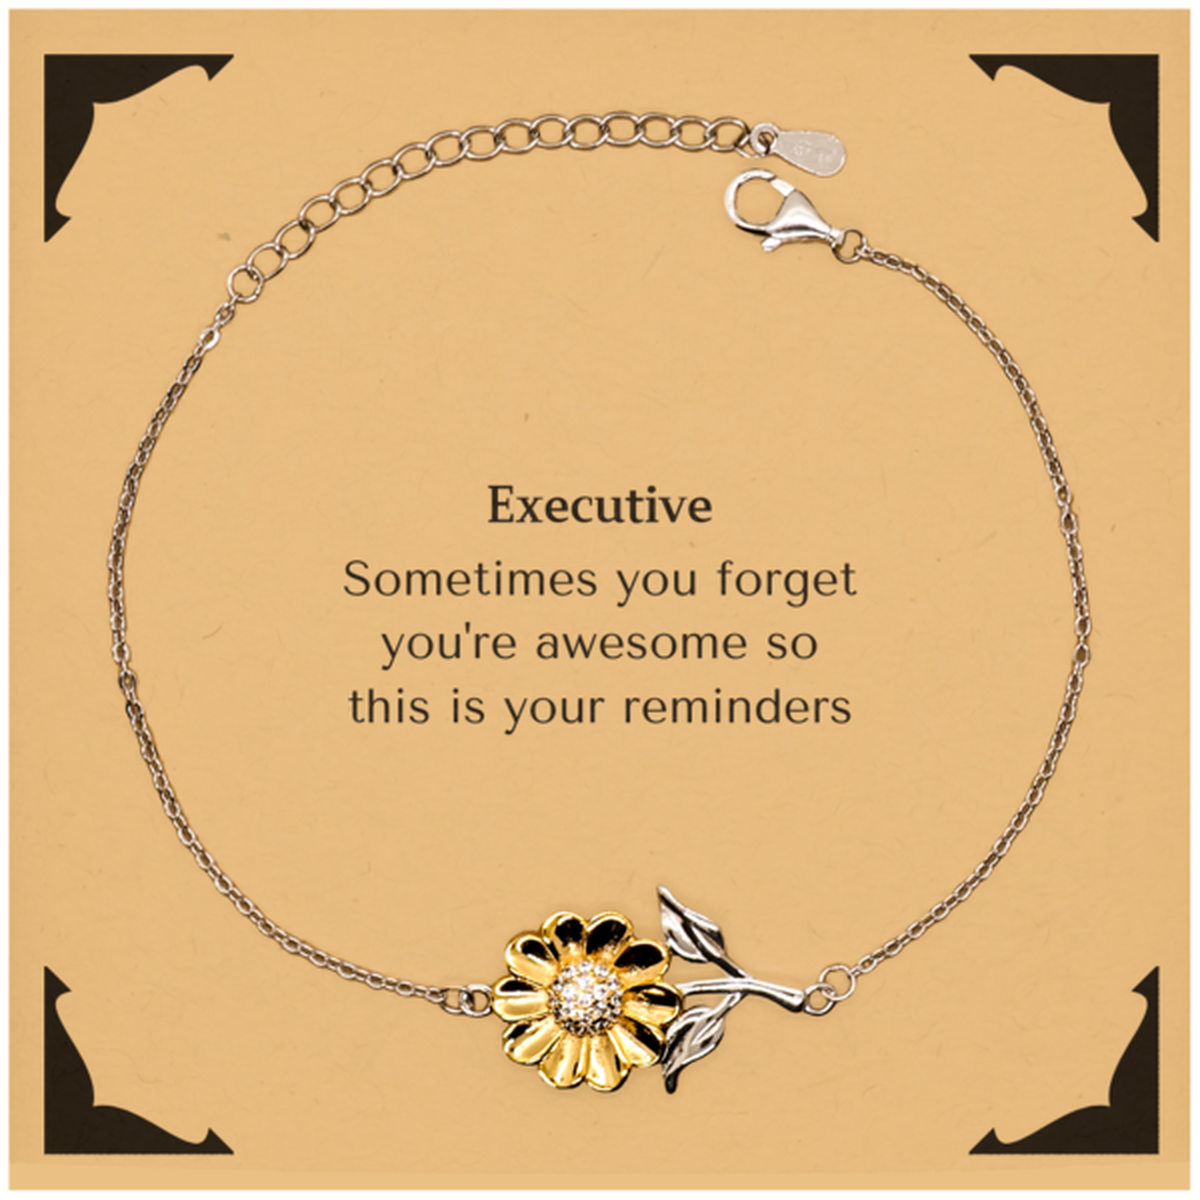 Sentimental Executive Sunflower Bracelet, Executive Sometimes you forget you're awesome so this is your reminders, Graduation Christmas Birthday Gifts for Executive, Men, Women, Coworkers